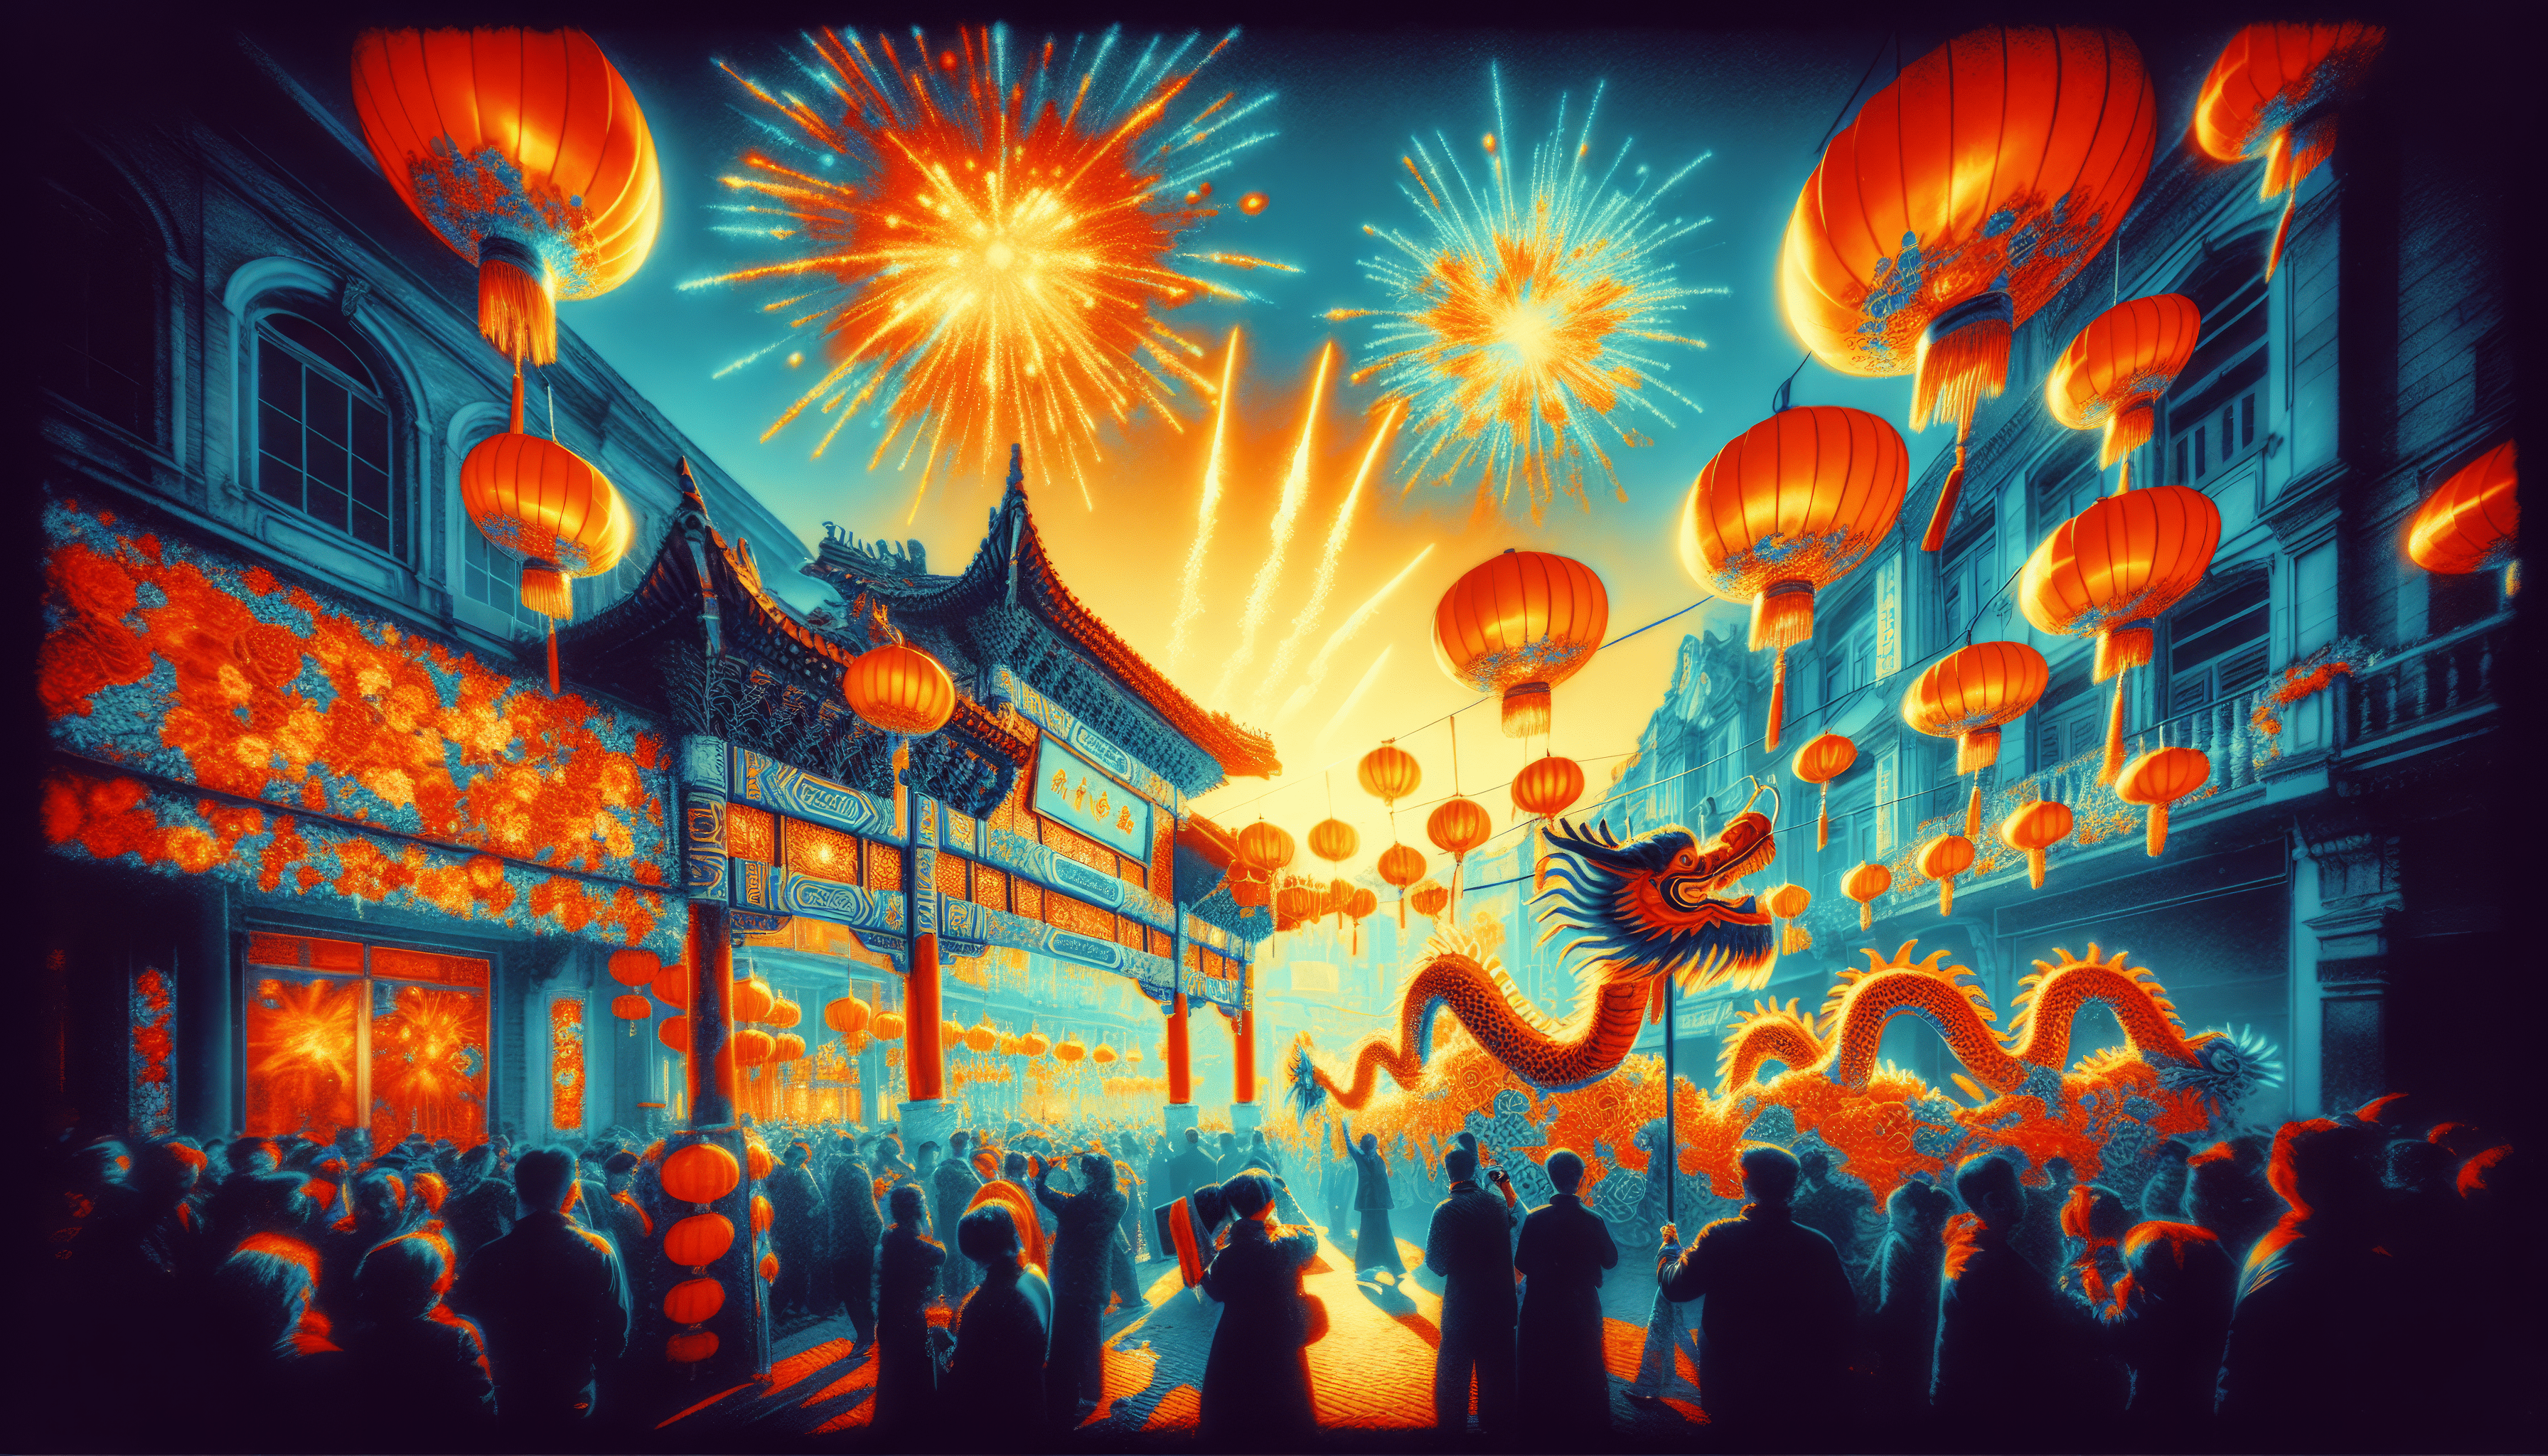 A digital painting of a crowded city street with a dragon and fireworks. - Chinese